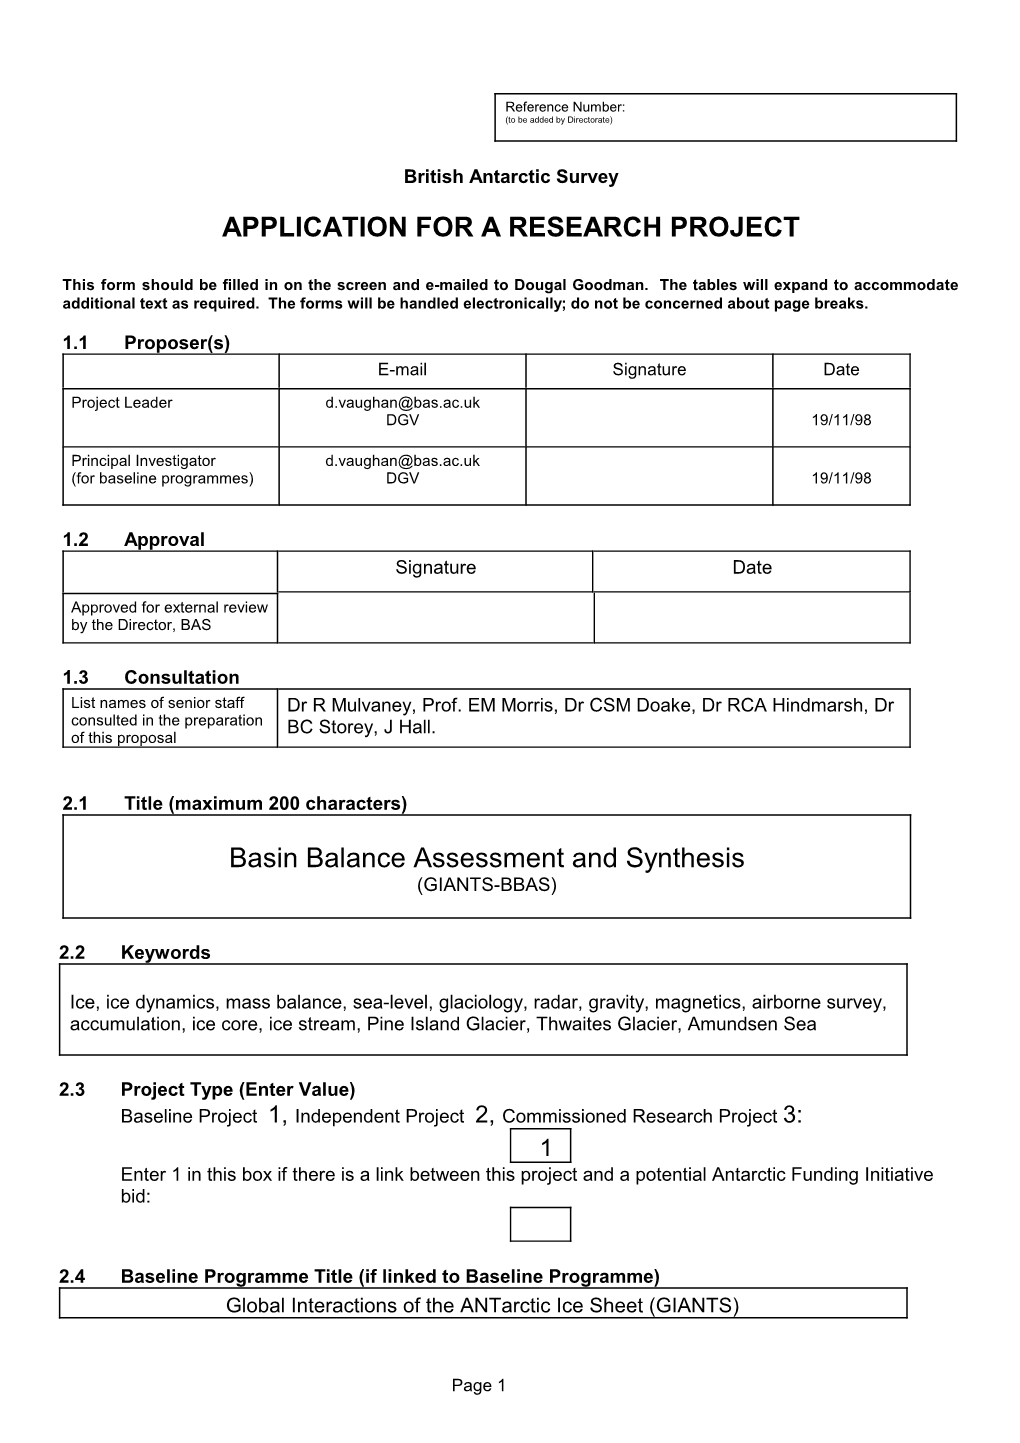 Application for a Research Project